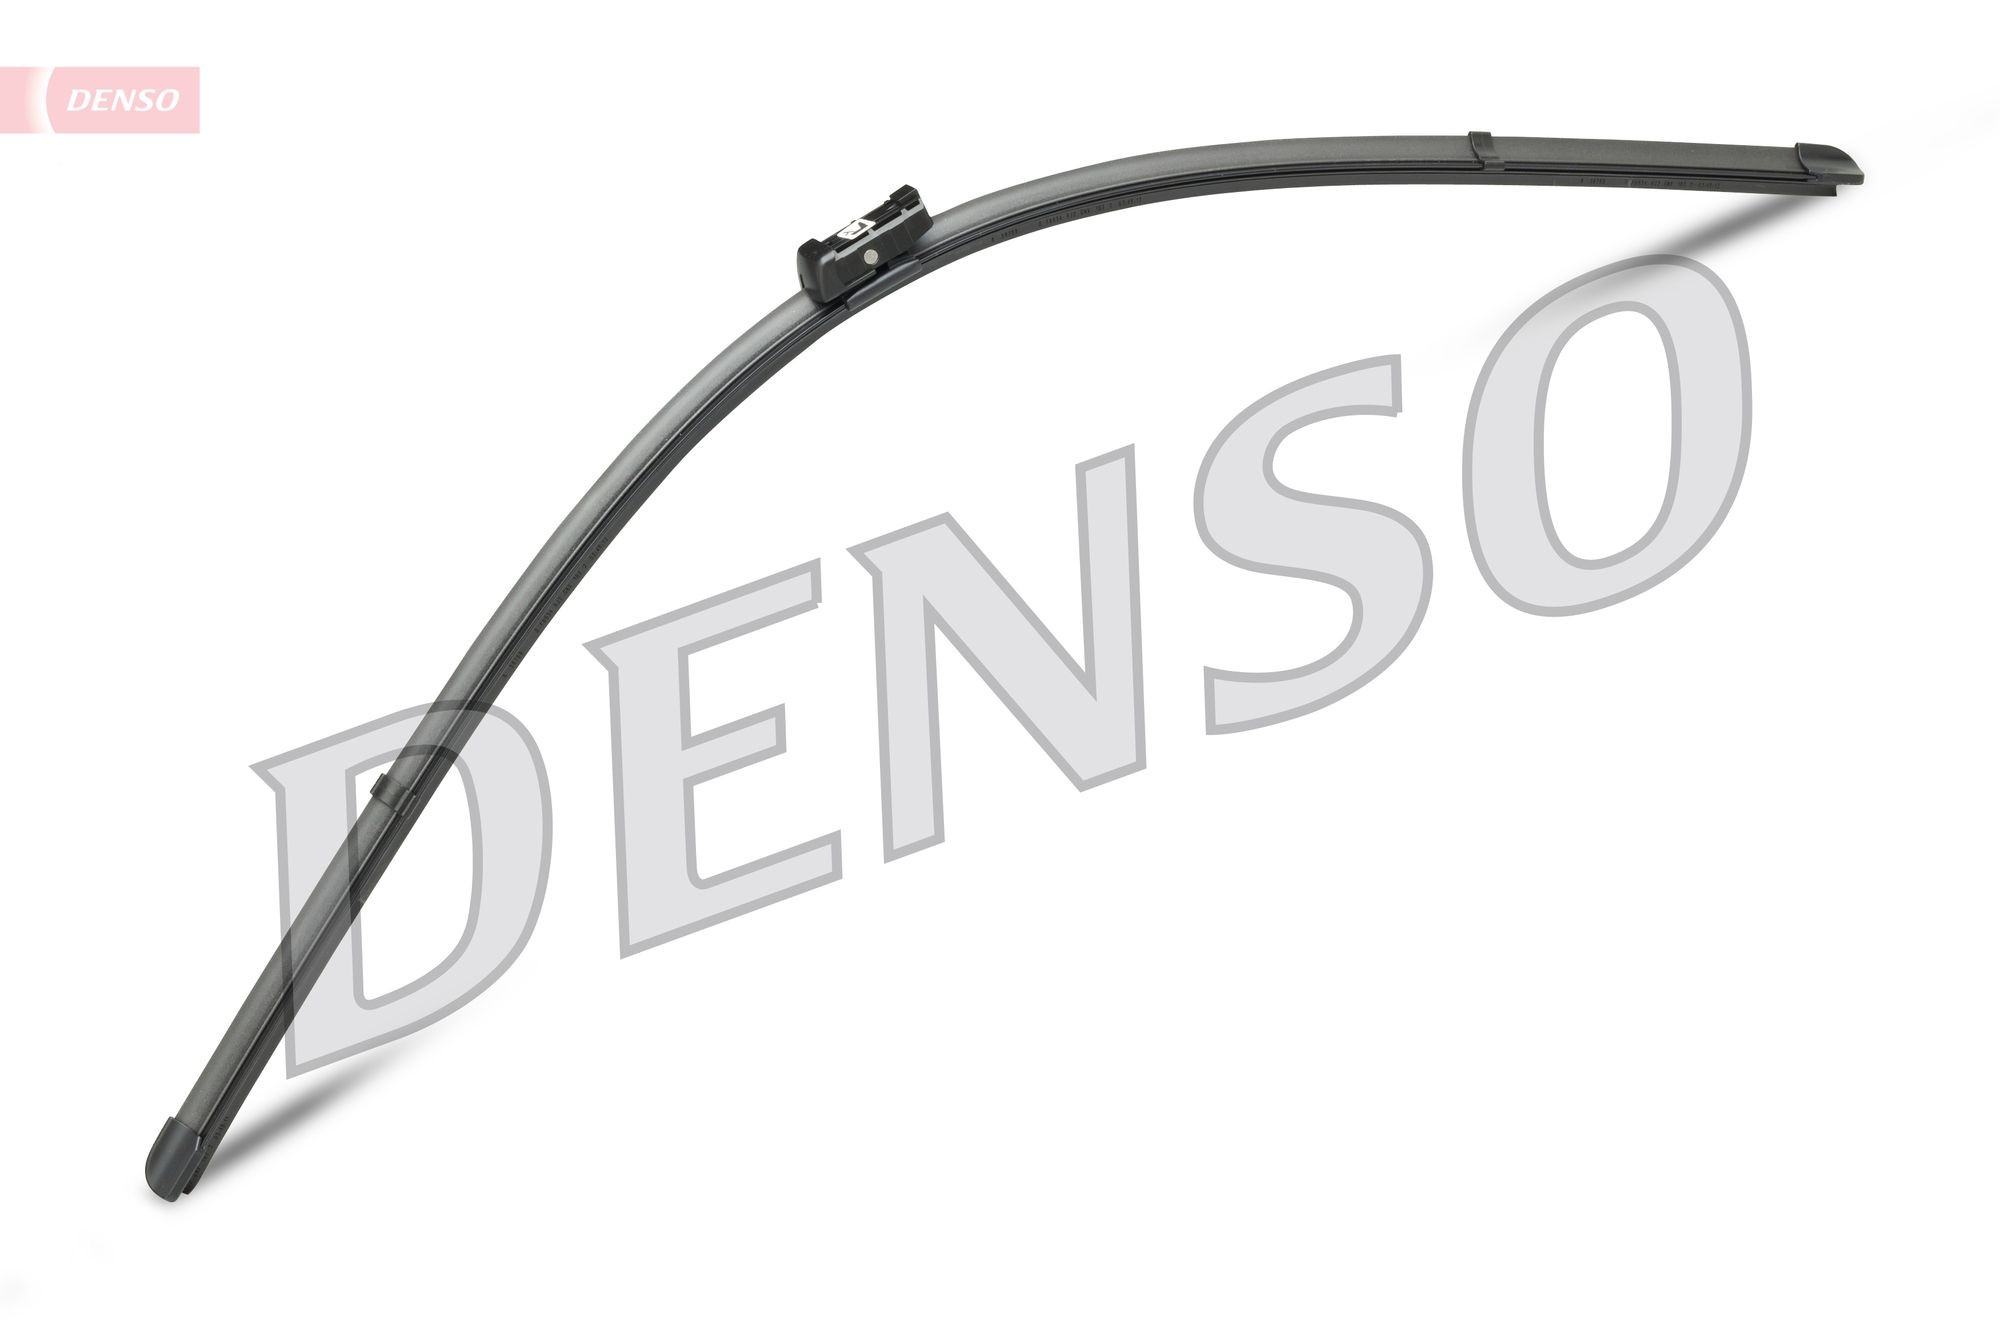 DENSO 700/580 mm, Flat wiper blade, for left-hand drive vehicles Left-/right-hand drive vehicles: for left-hand drive vehicles Wiper blades DF-064 buy